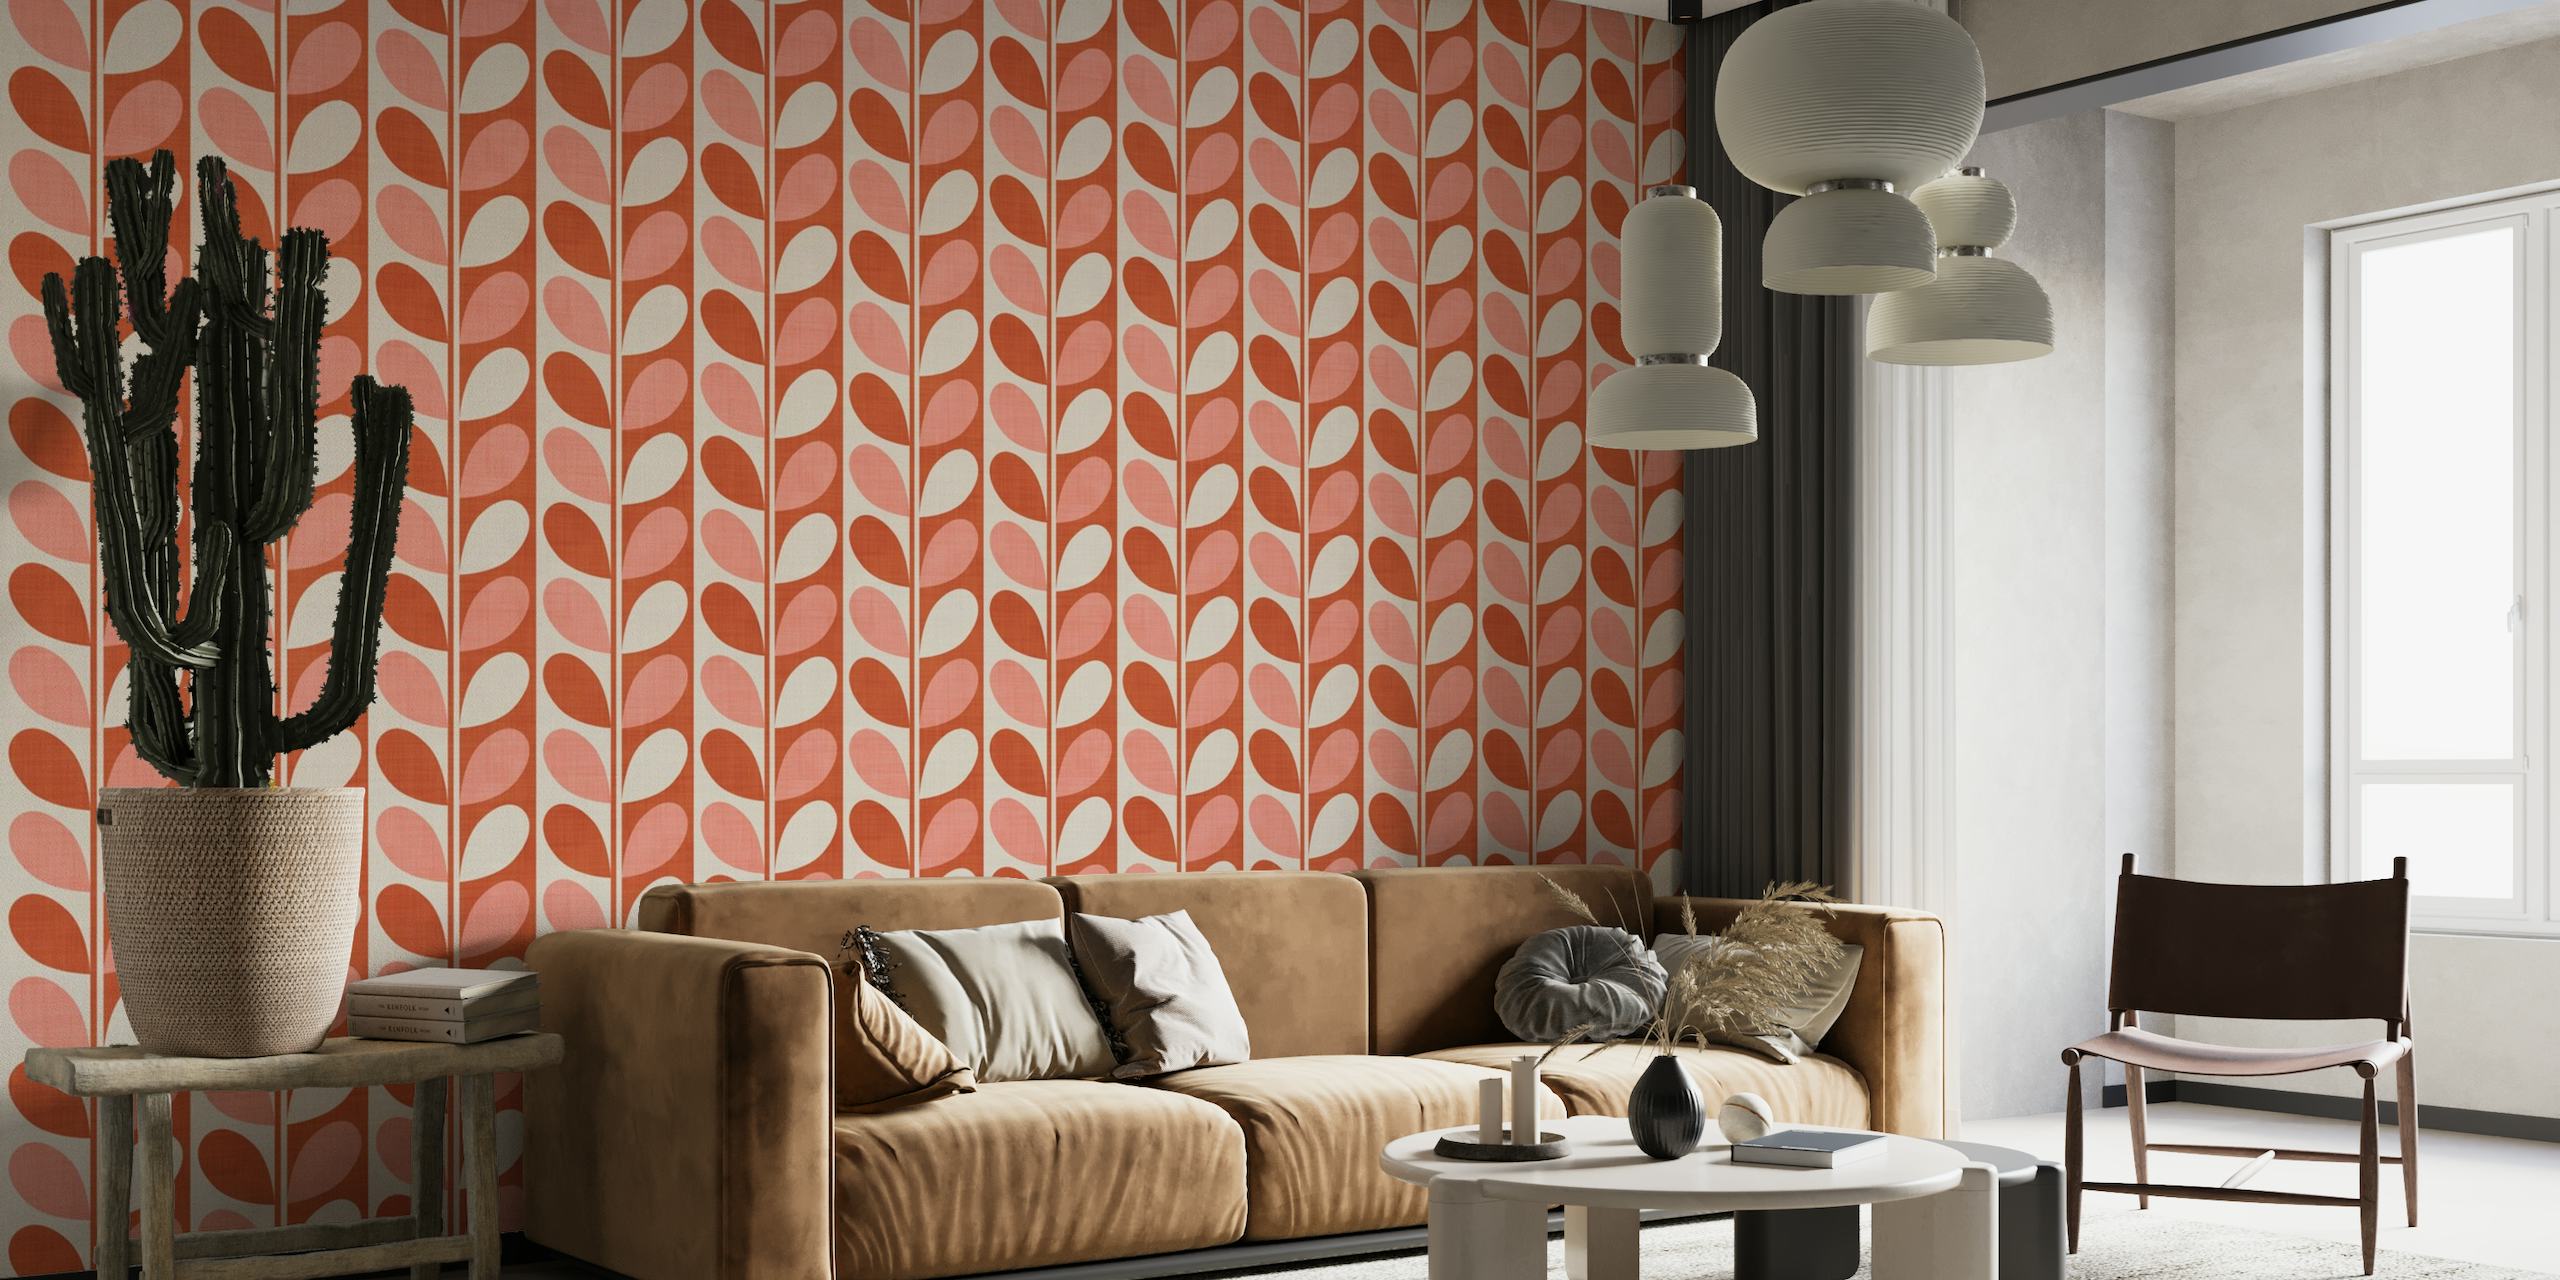 Midcentury modern style abstract leaves wall mural in terracotta and cream colors